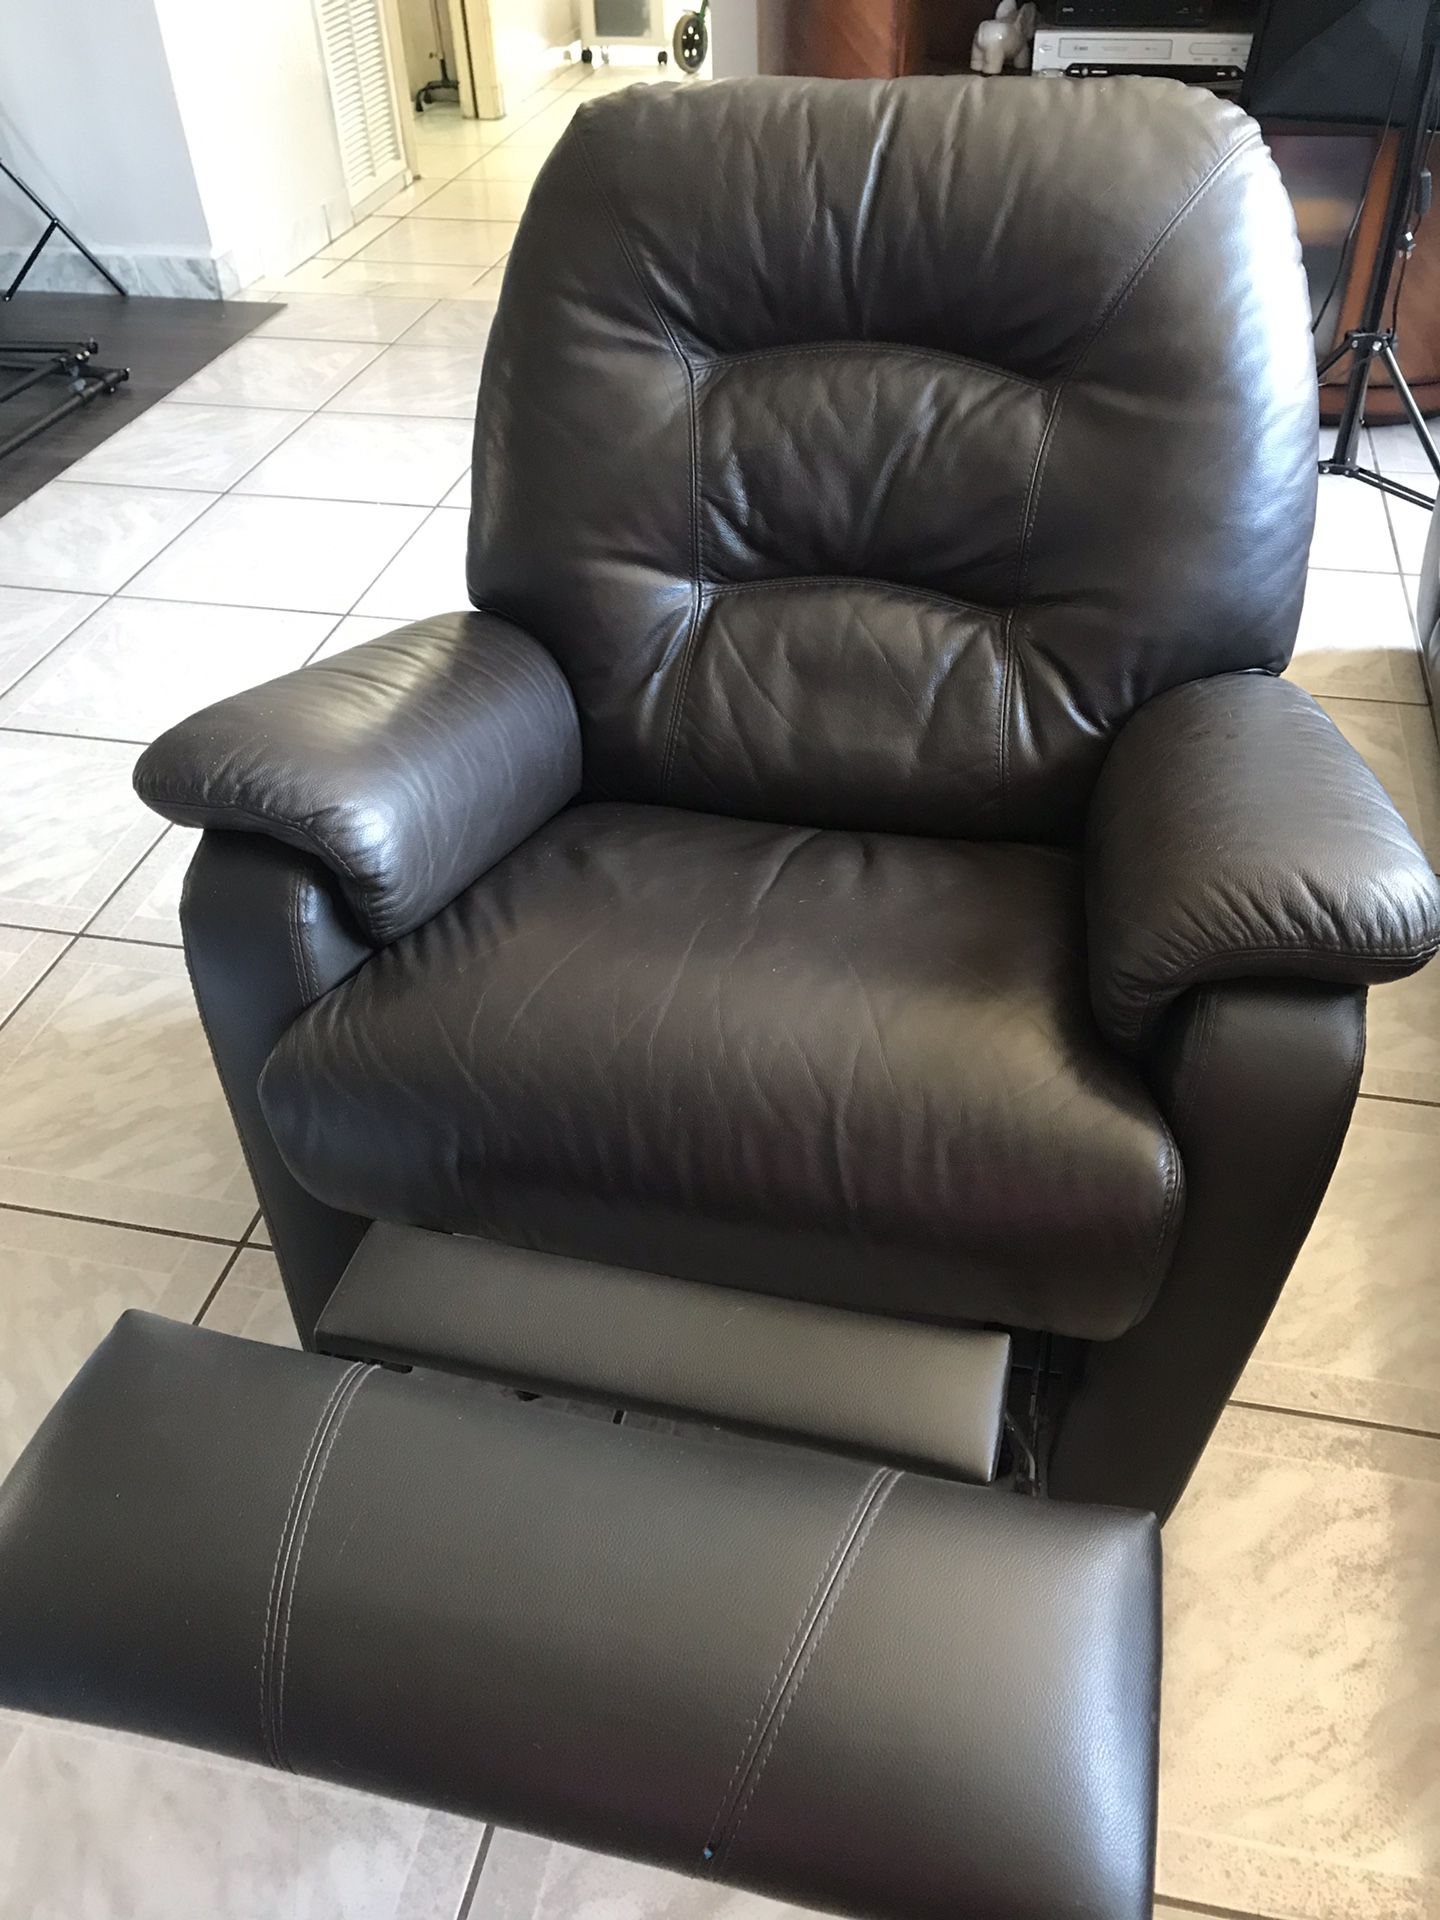 Brown leather recliner for sale -NEGOTIABLE